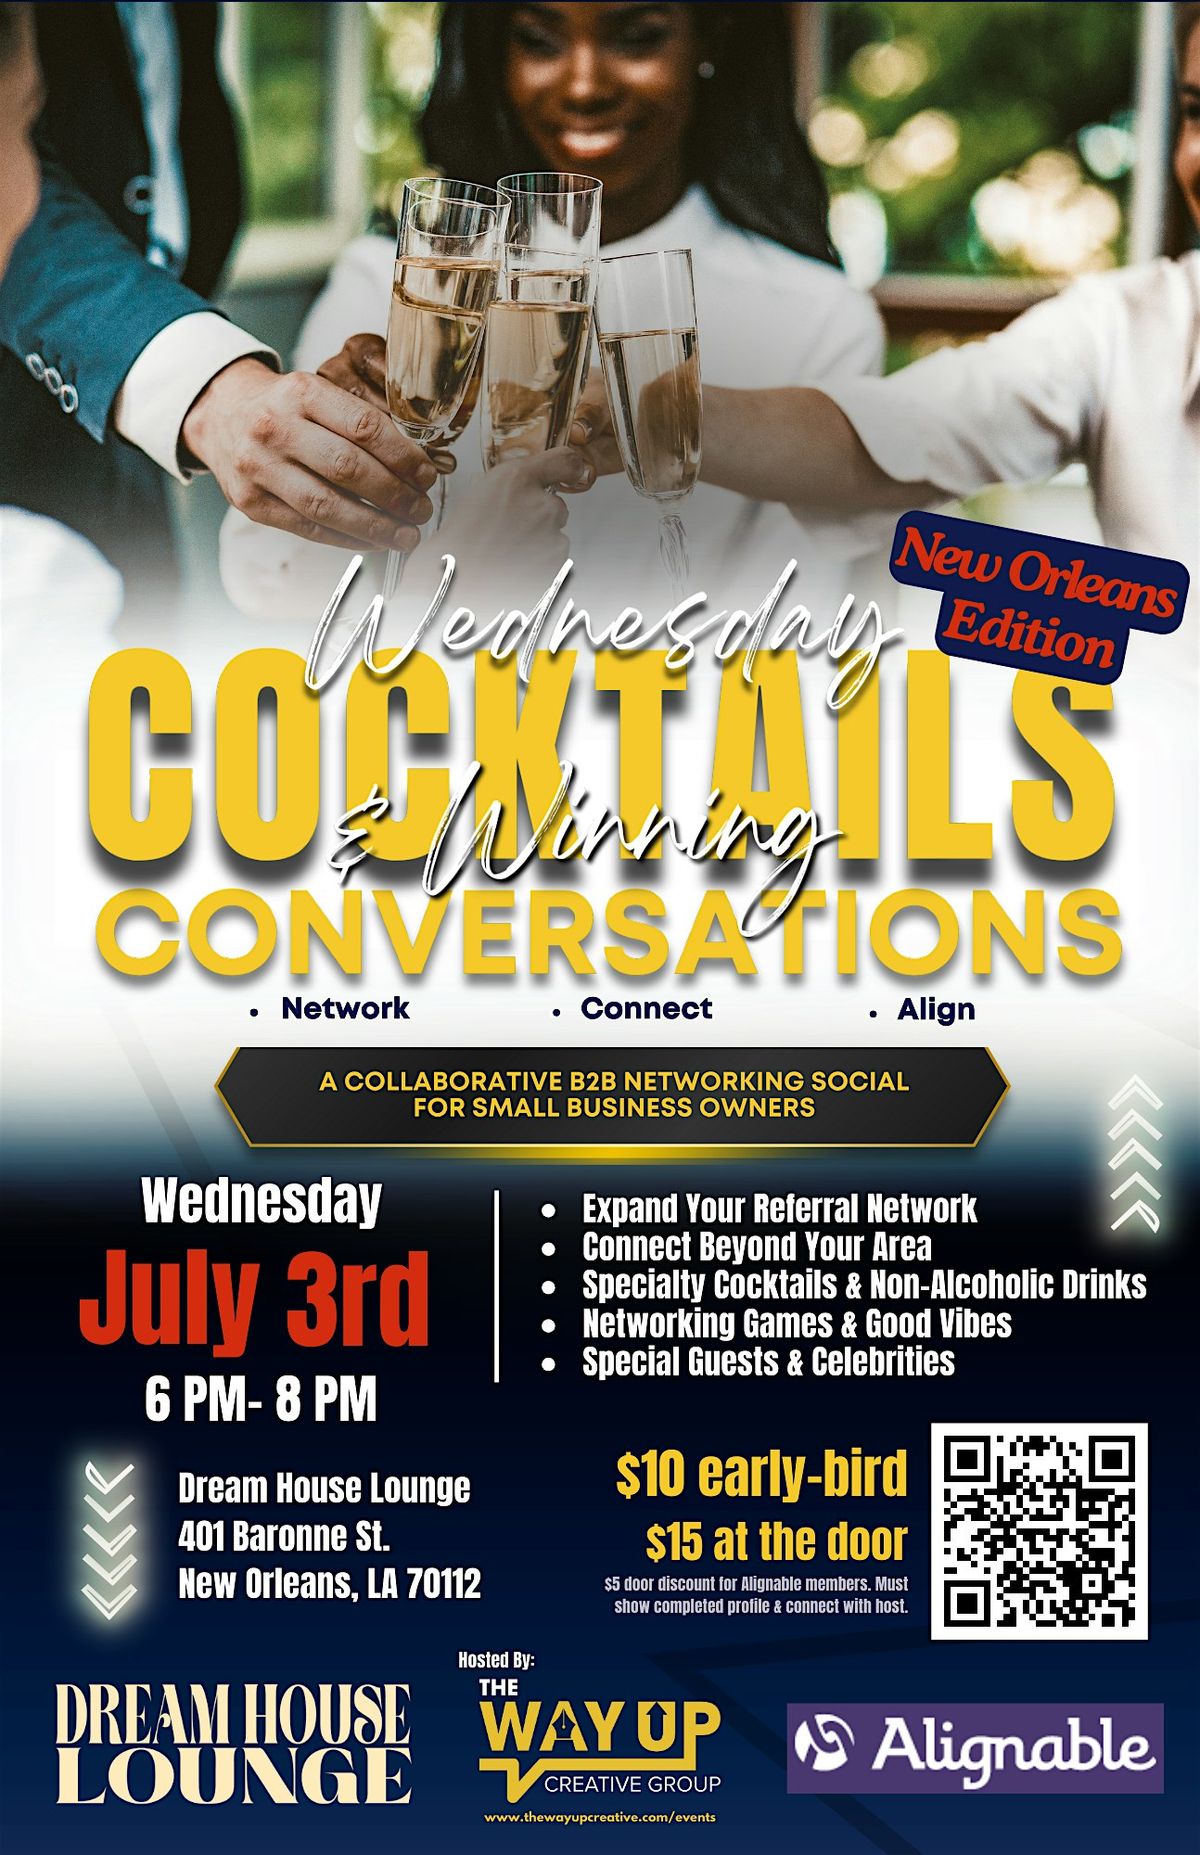 New Orleans Edition: Wednesday Cocktails & Winning Conversations